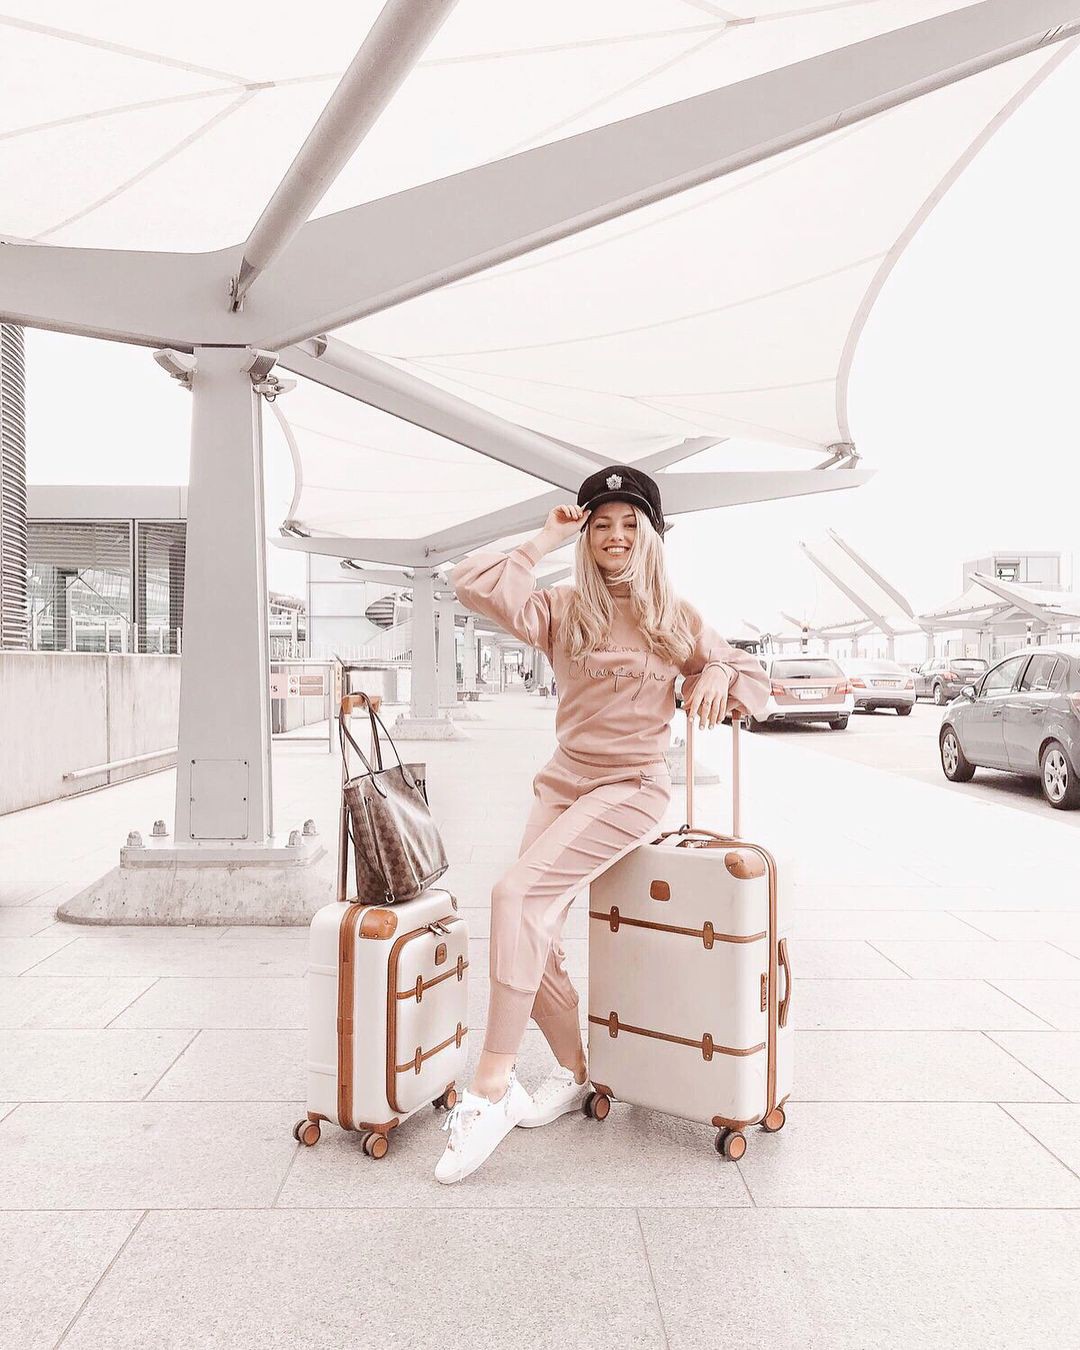 Instagram freddy cousin brown freddy cousin brown, freddy my love: White Outfit,  Airport Outfit Ideas  